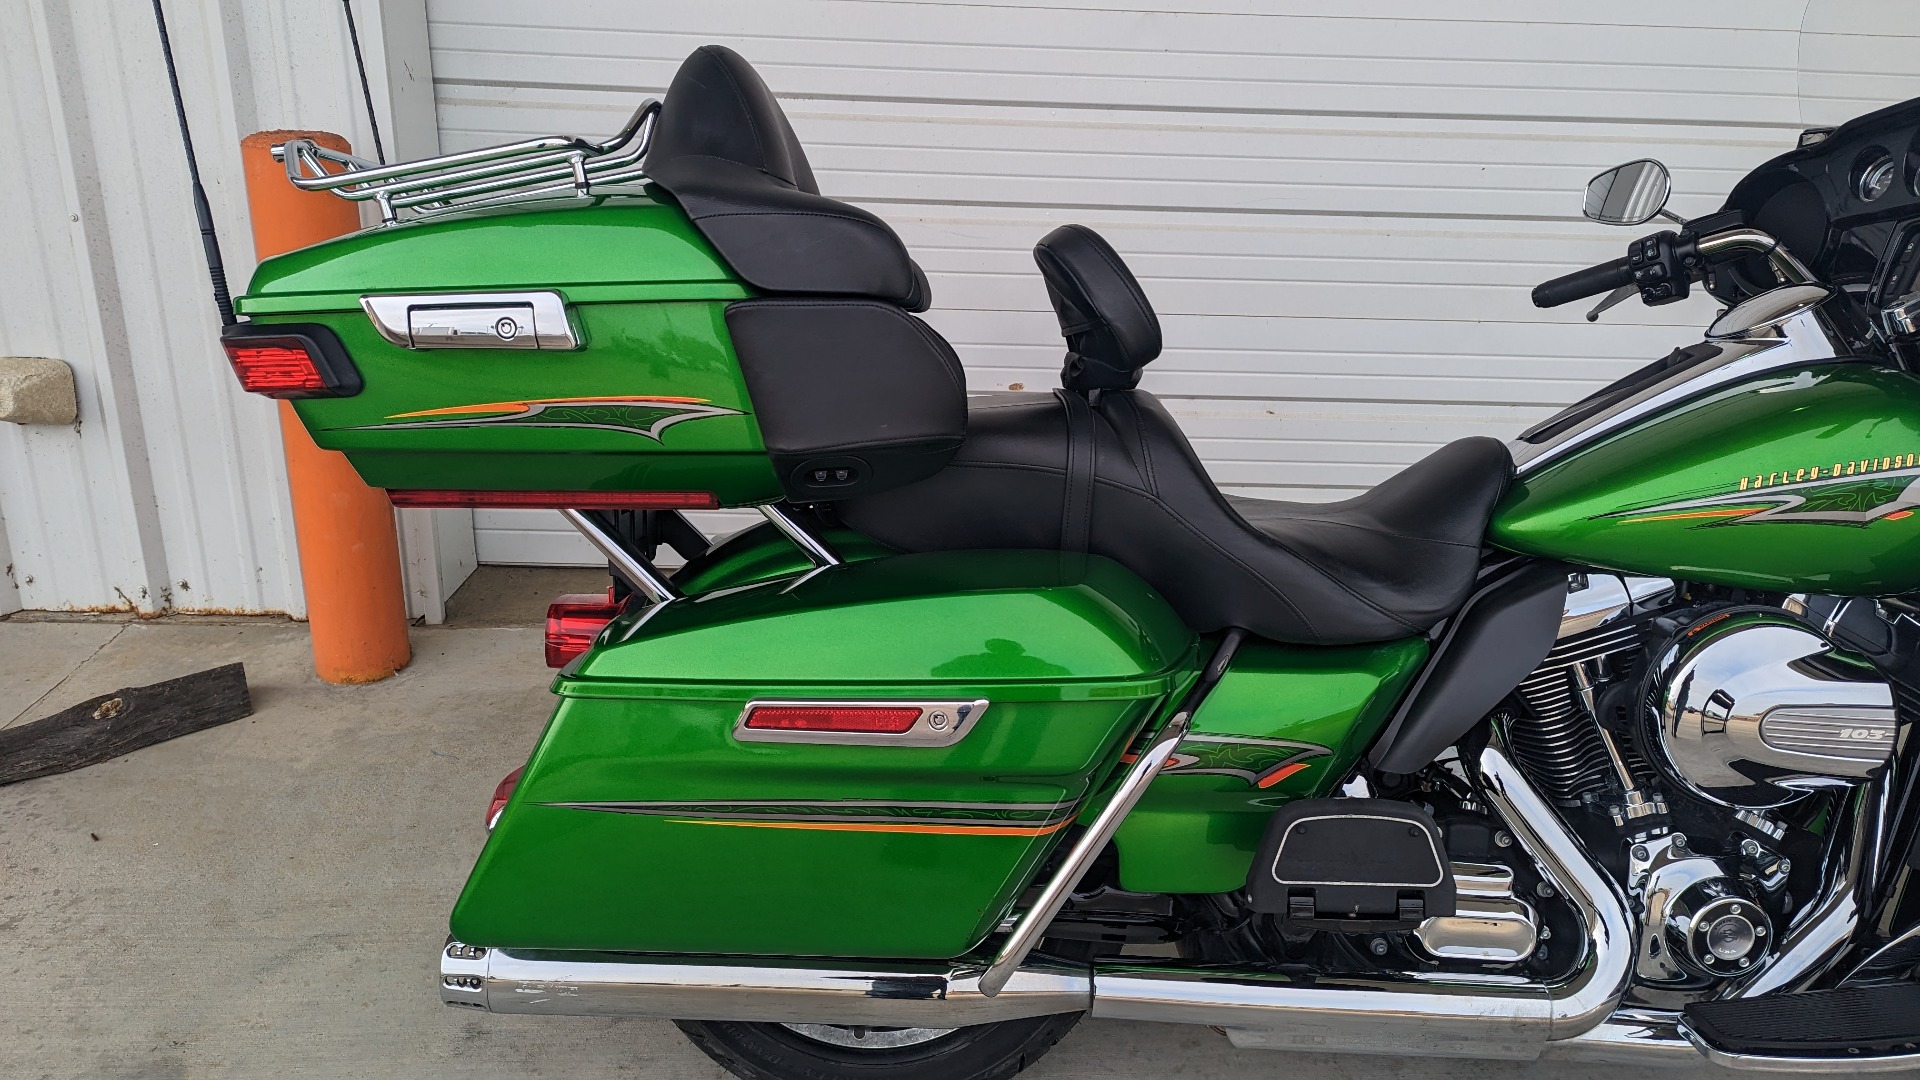 2015 harley davidson ultra limited radioactive green for sale in texas - Photo 5